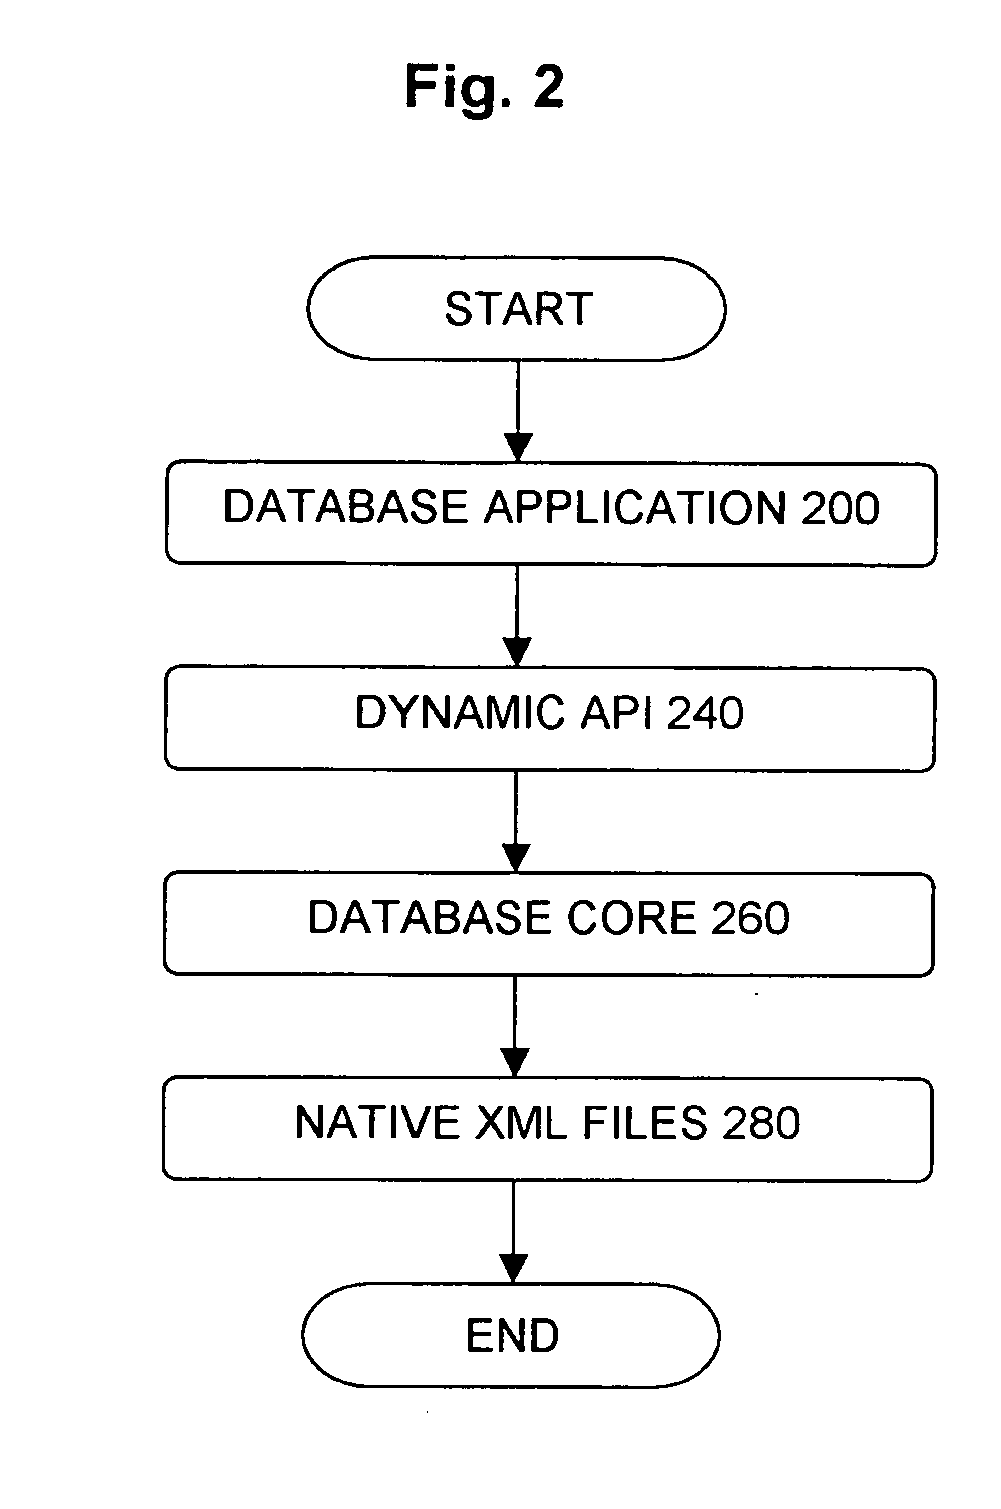 System, Method, and Computer Program Product of Building A Native XML Object Database